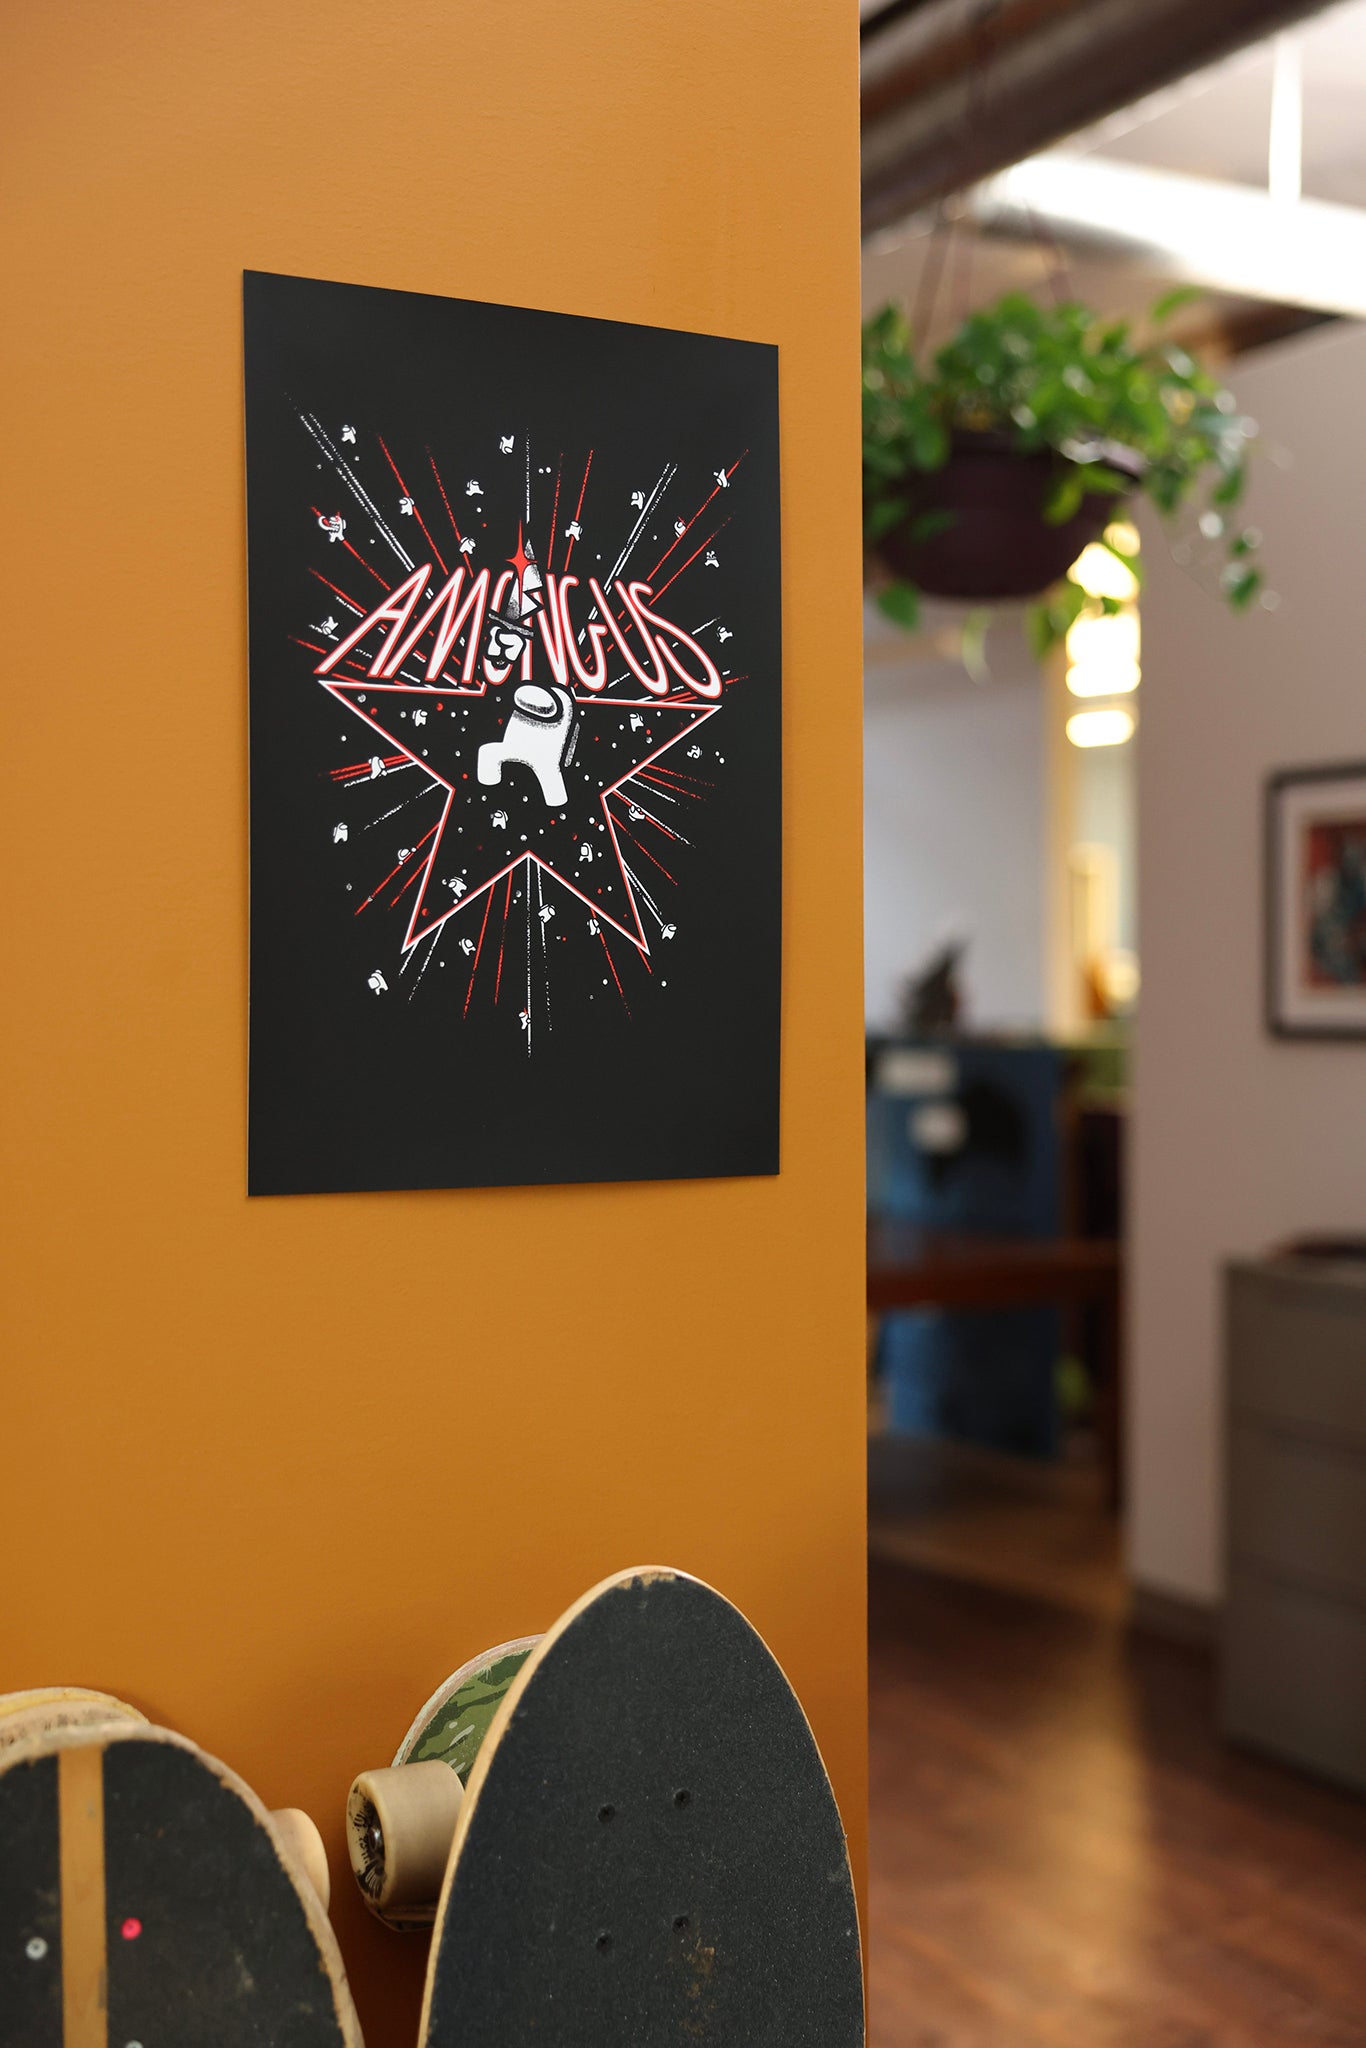 A close up photograph of a model’s hands holding up the Among Us: 5th Anniversary Print  by Amy Liu. The print depicts a white Impostor among a flurry of stars and fireworks. The impostor stands in the middle of a red outlined star holding a bloody knife over their head. “Among Us” text is written in red and white sitting on top of the outlined star. 